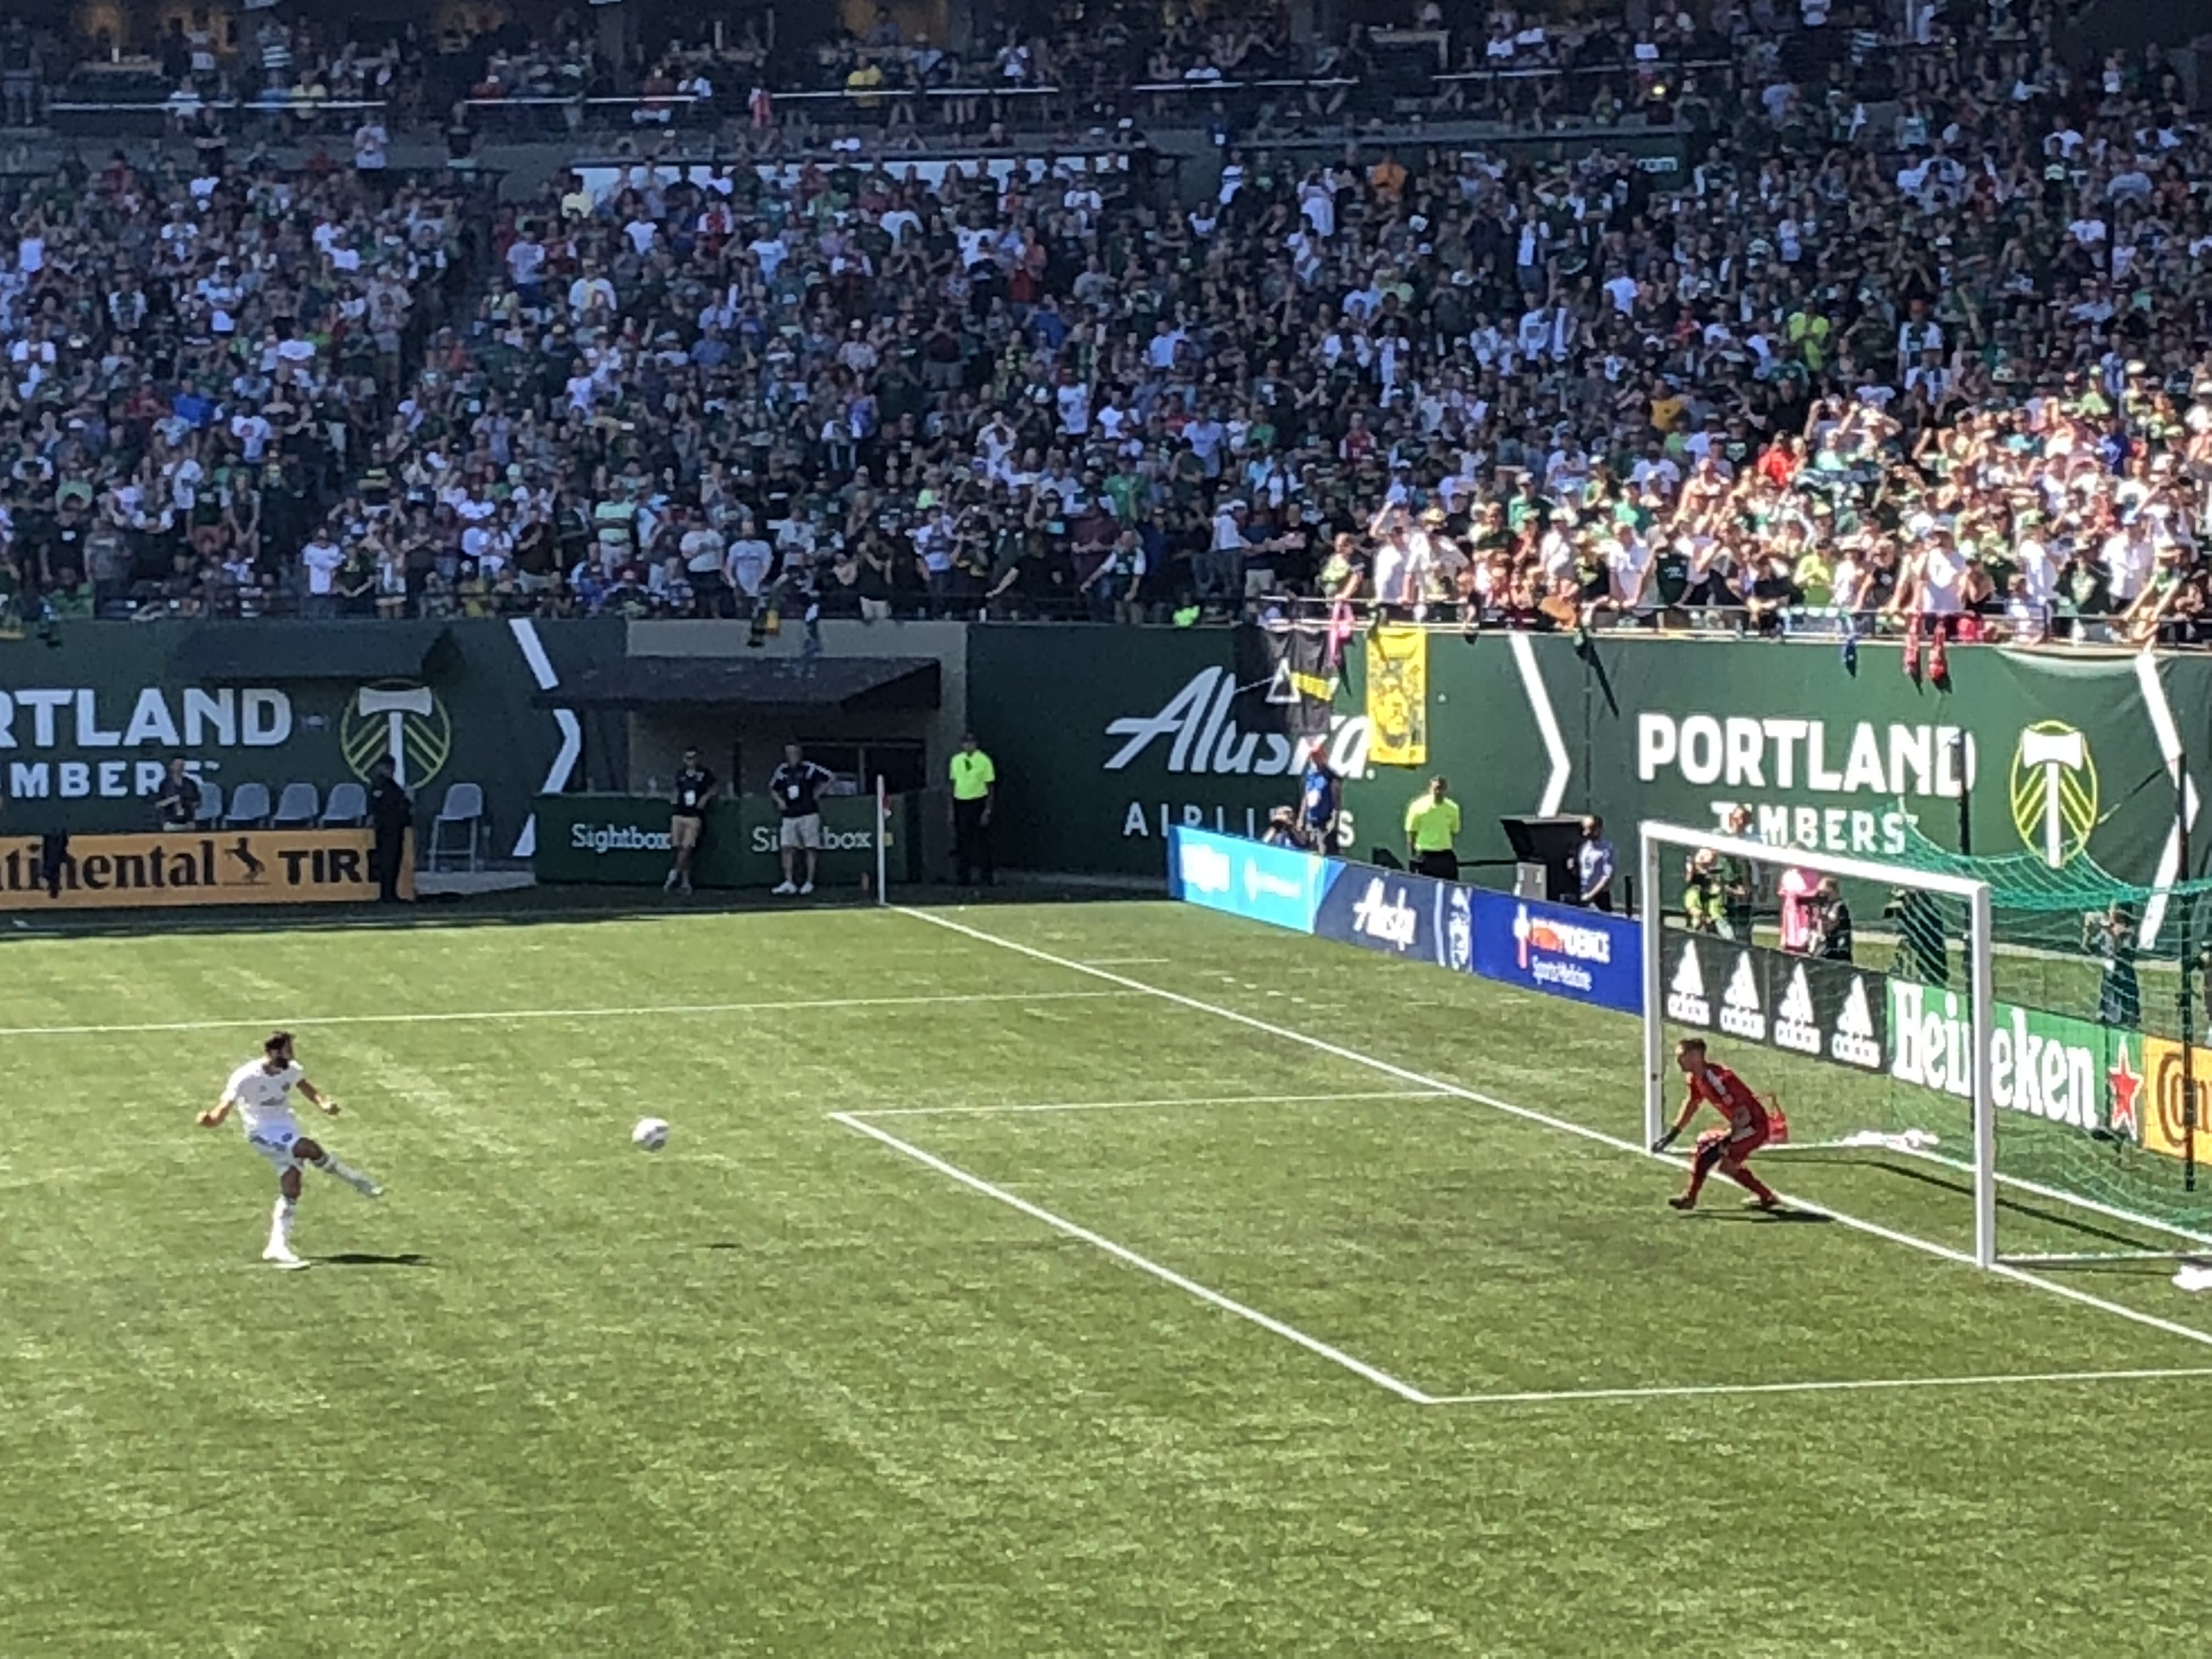 Diego Valeri scores on a penalty kick early in the second half against the LA Galaxy on Saturday, June 2, 2018.